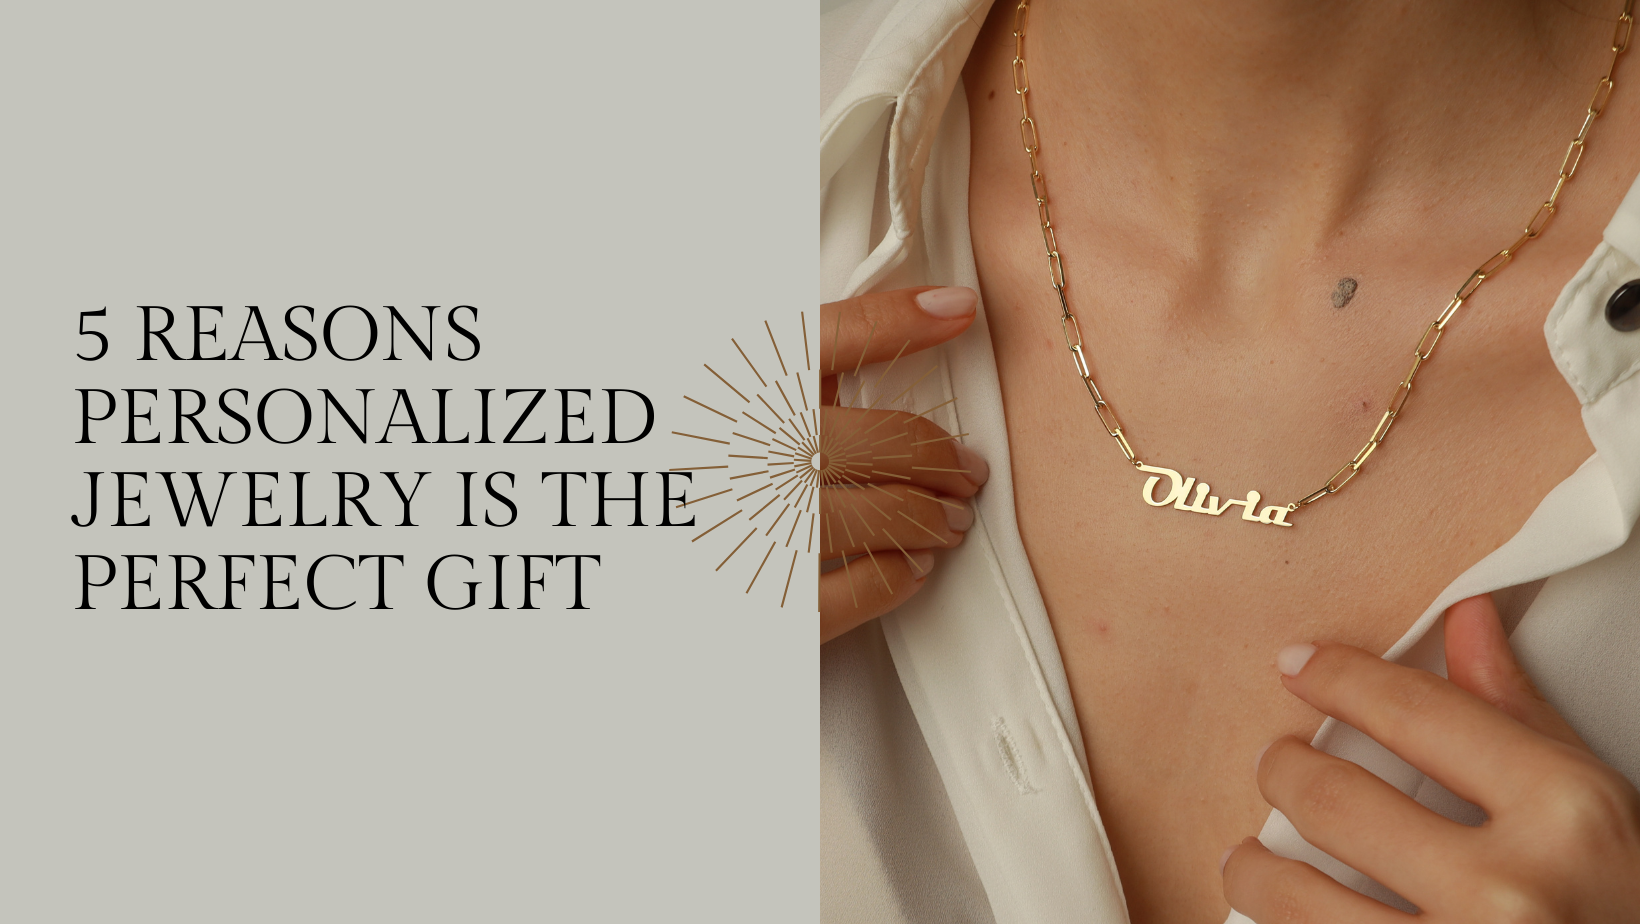 5 Reasons Personalized Jewelry Makes the Perfect Gift